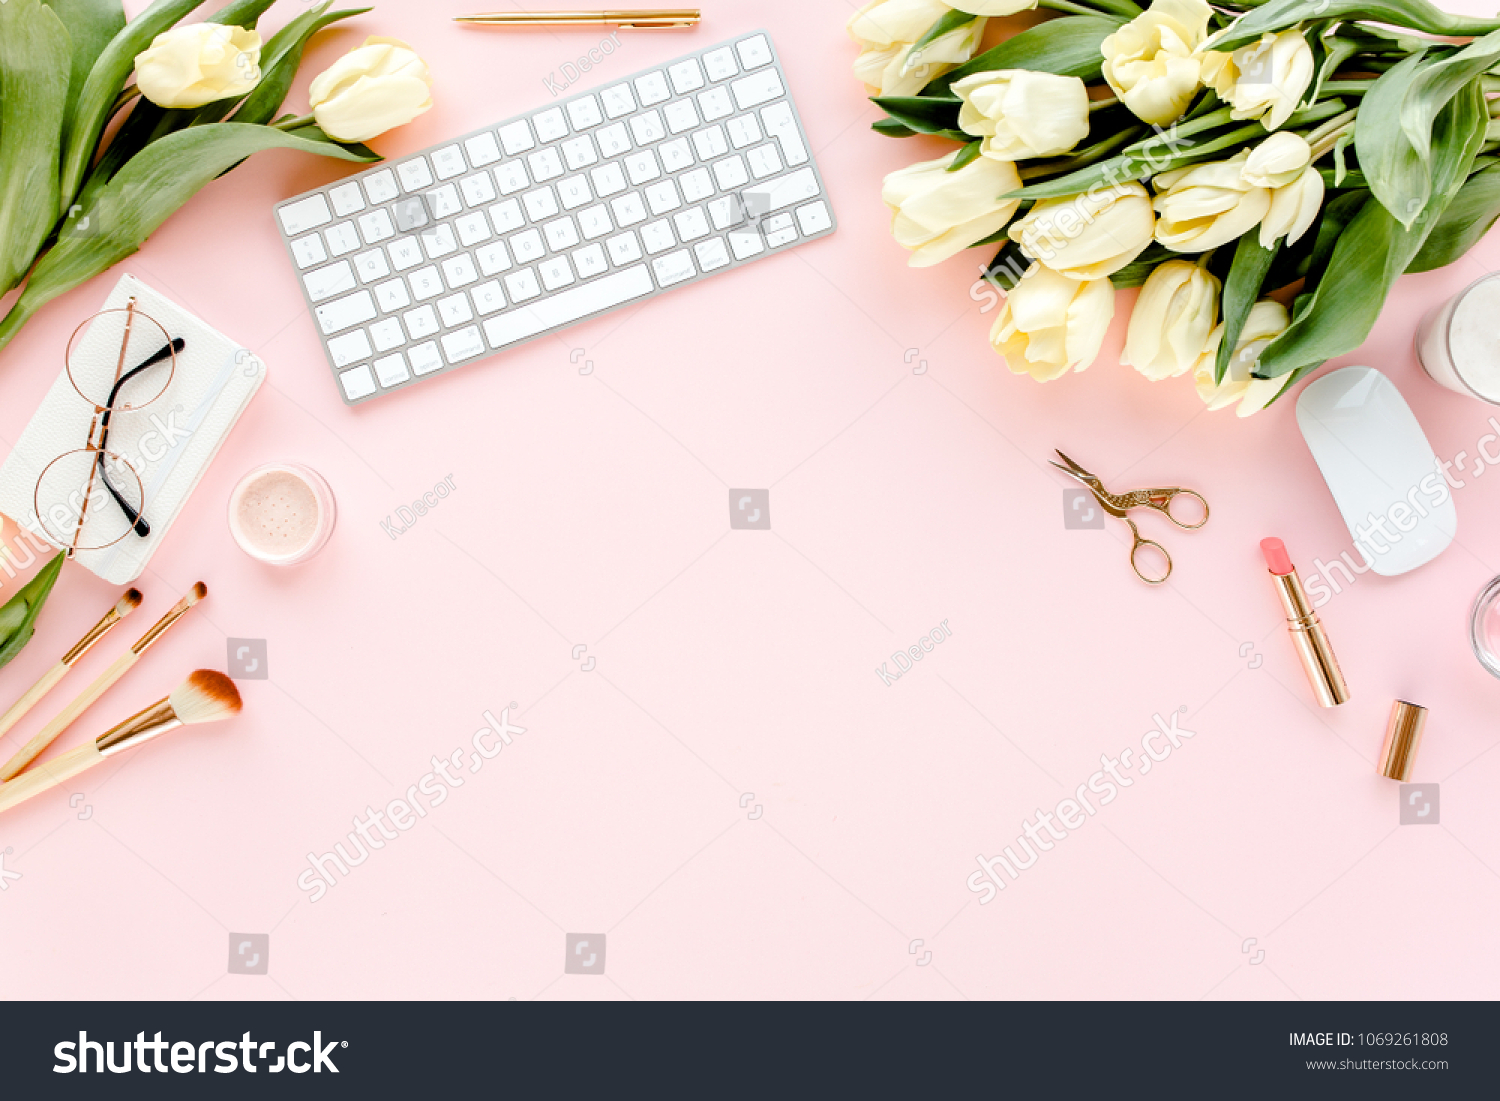 Female Home Office Desk Workspace Computer Stock Photo Edit Now